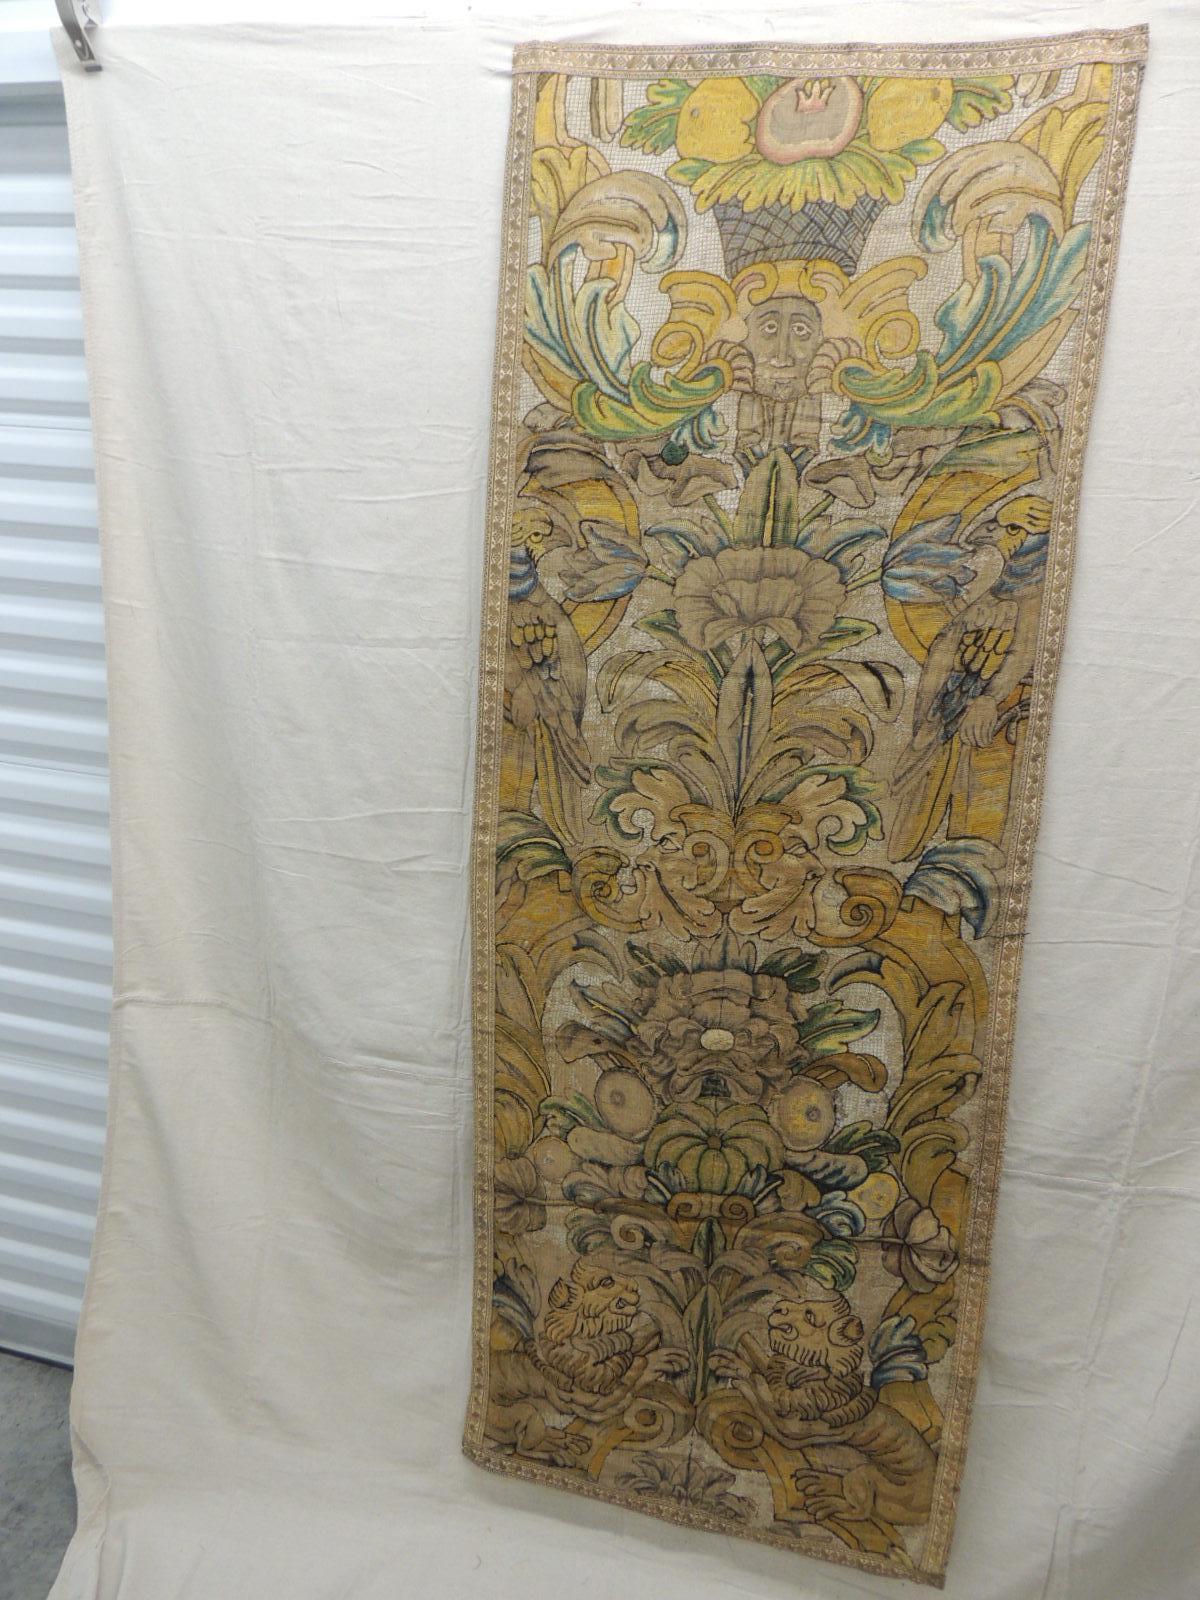 Hand-Crafted Large Antique English Needlework Tapestry Wall Hanging  For Sale